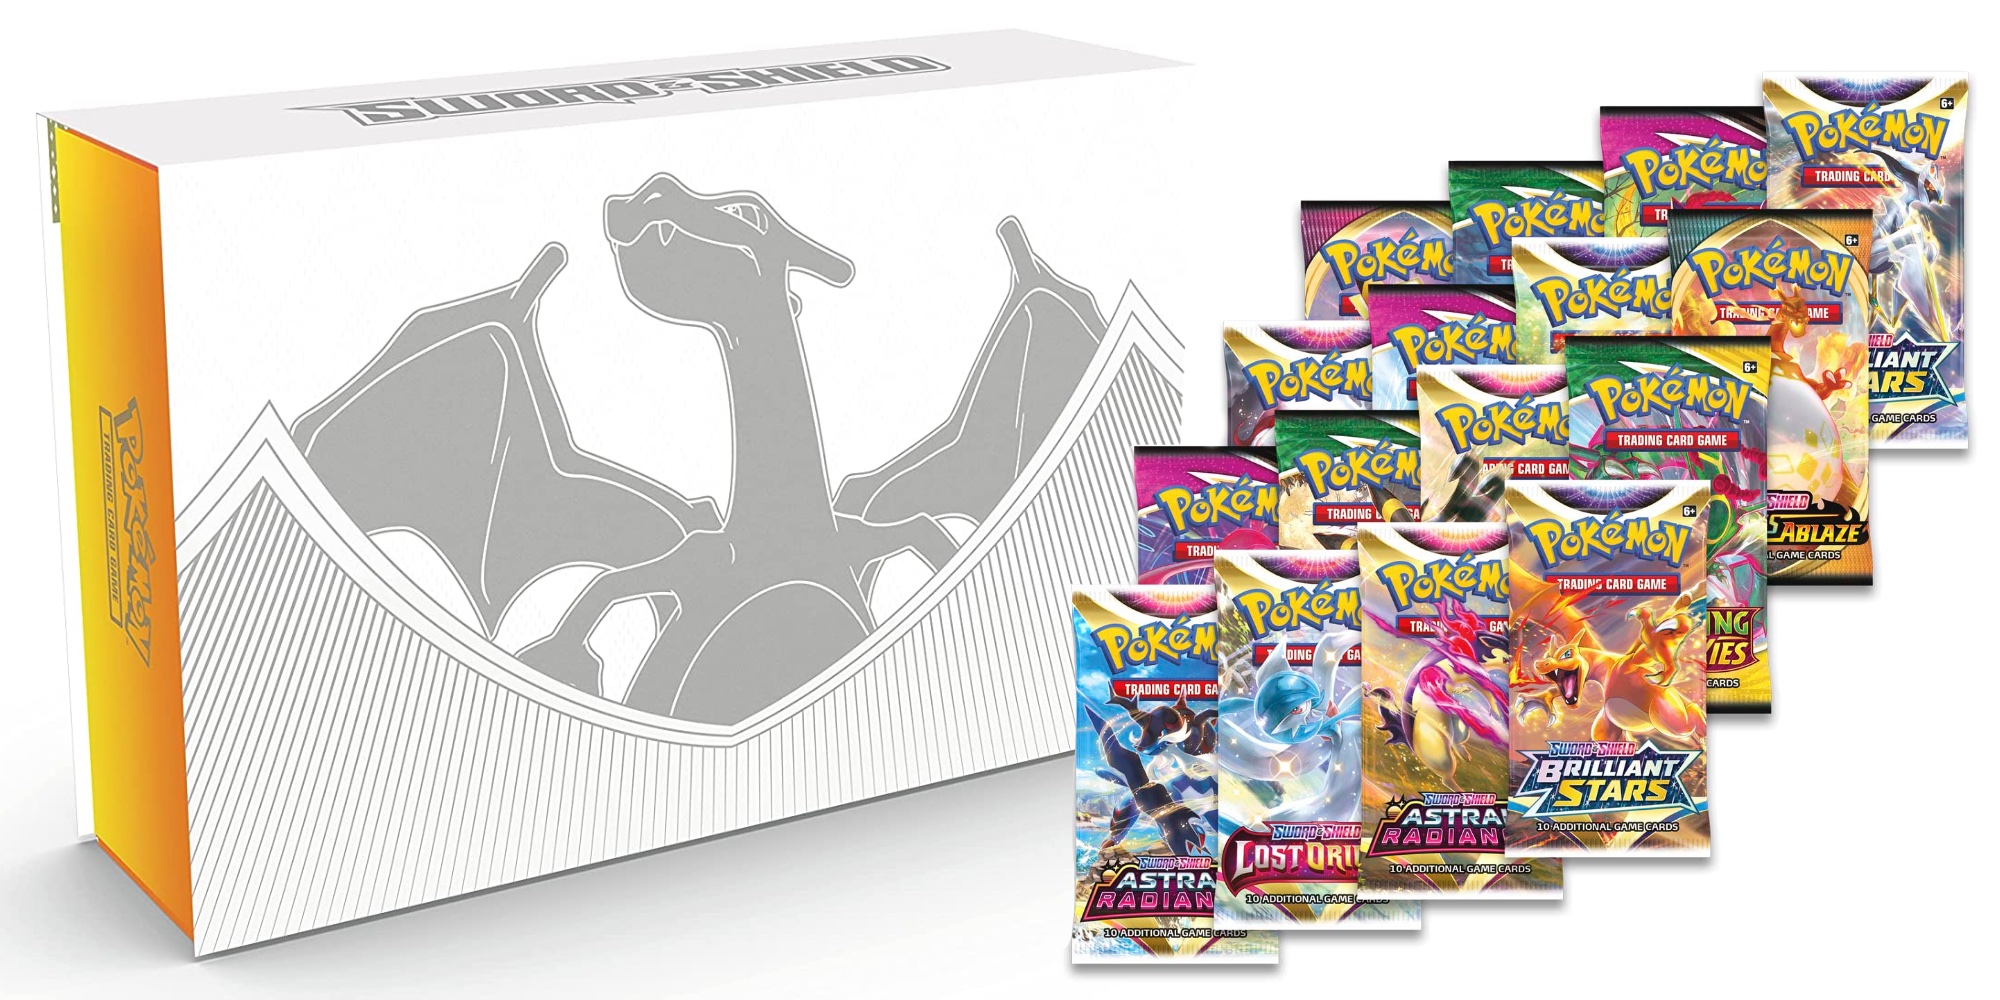 Pokémon TCG Ultra-Premium Charizard Collection back in stock with drop to  $101